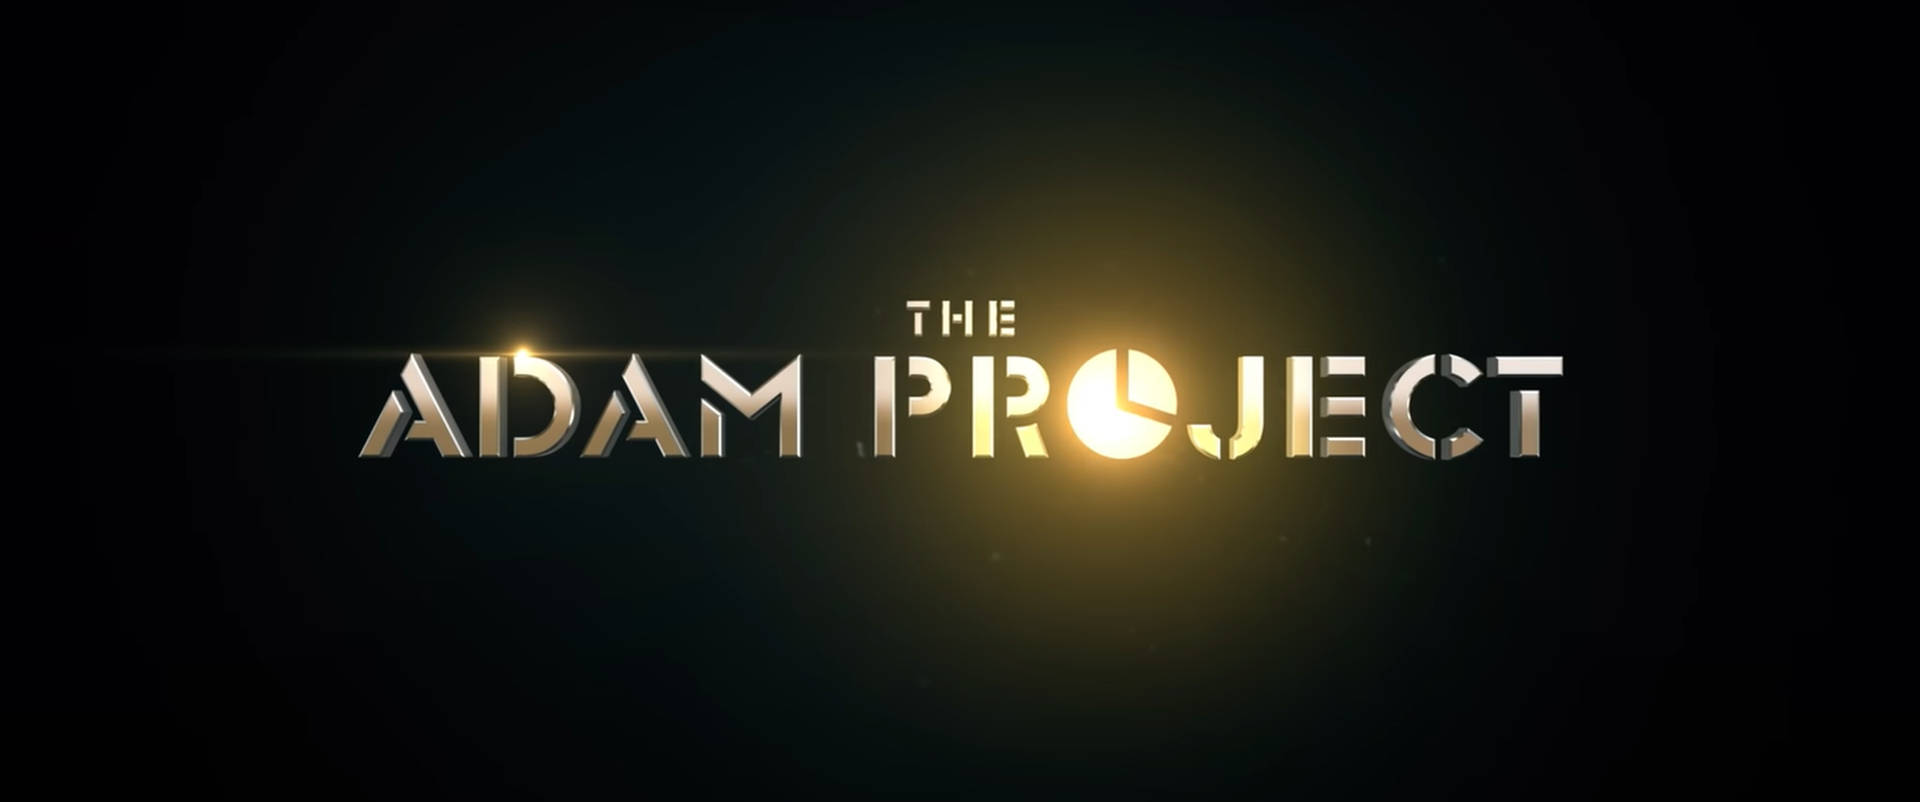 The Adam Project Movie Title